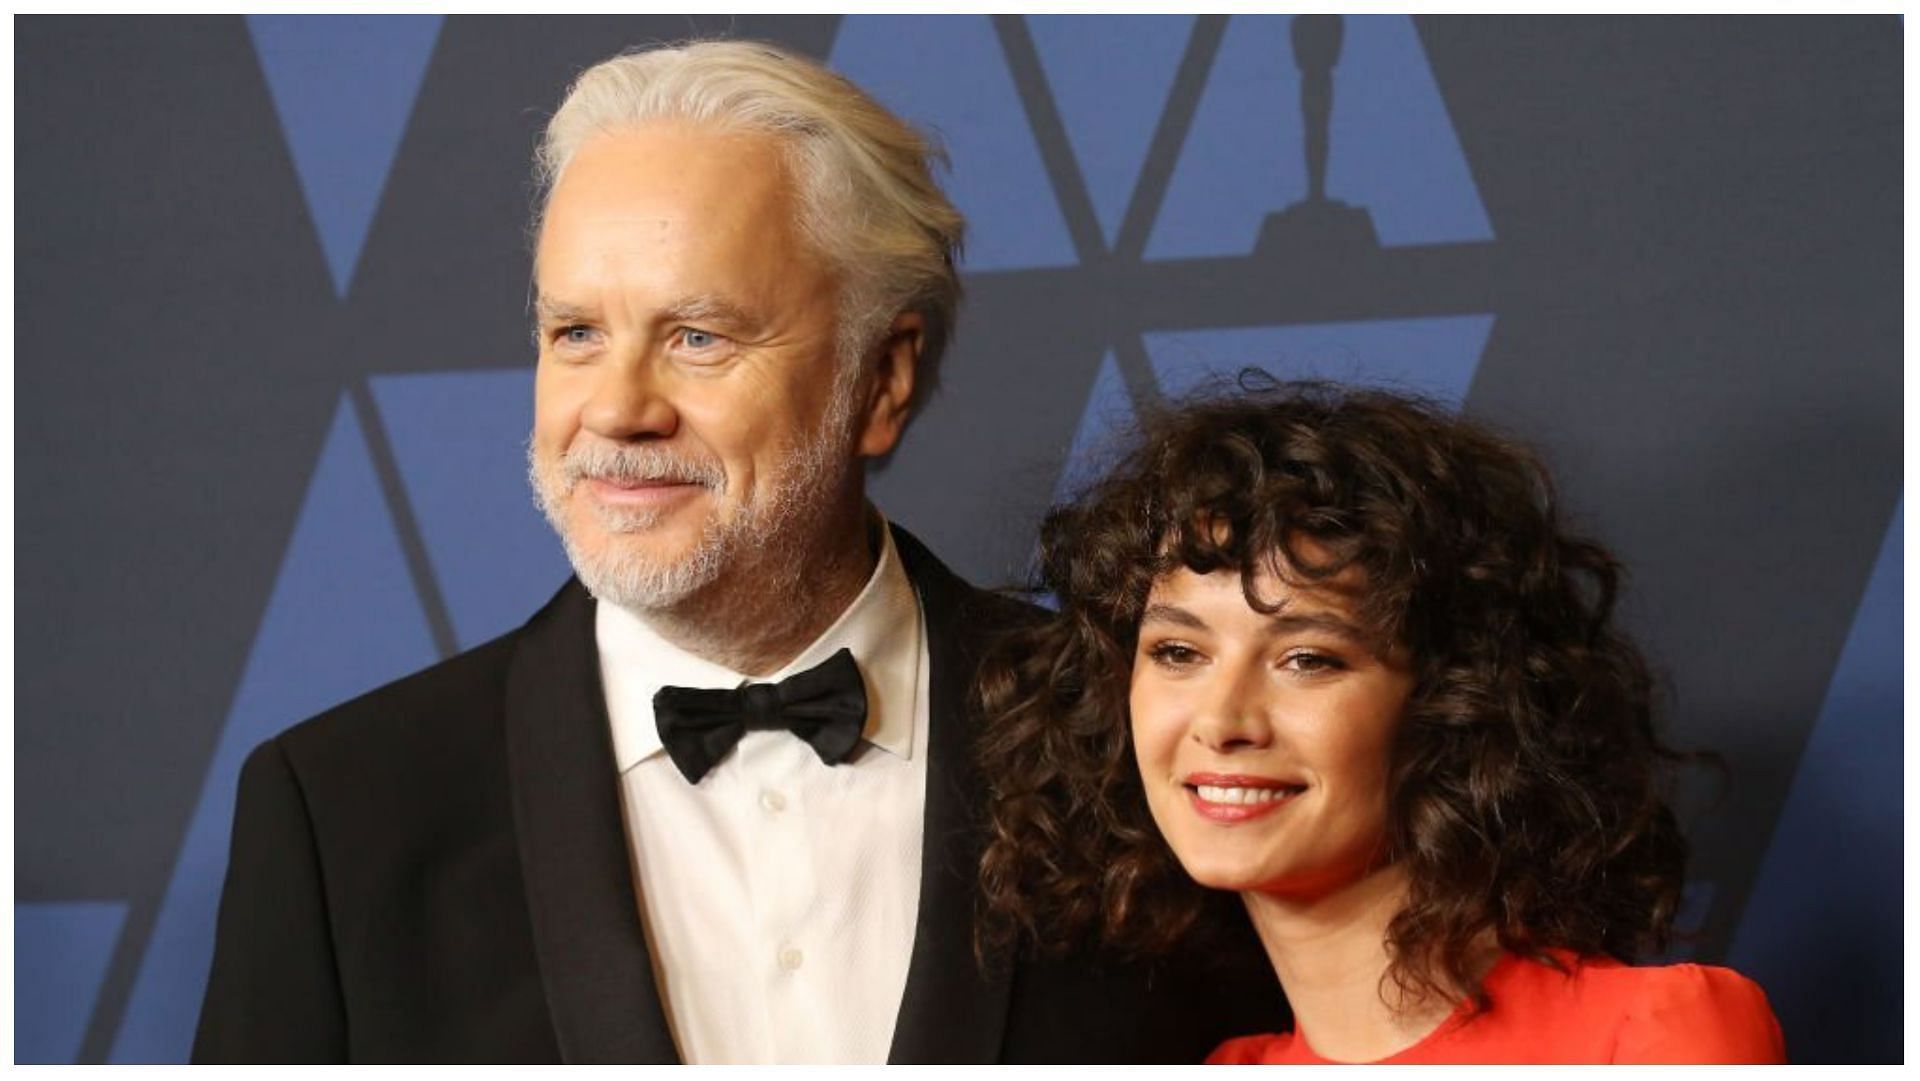 Tim Robbins and Gratiela Brancusi have been together since 2018 (Image via Michael Tran/Getty Images)